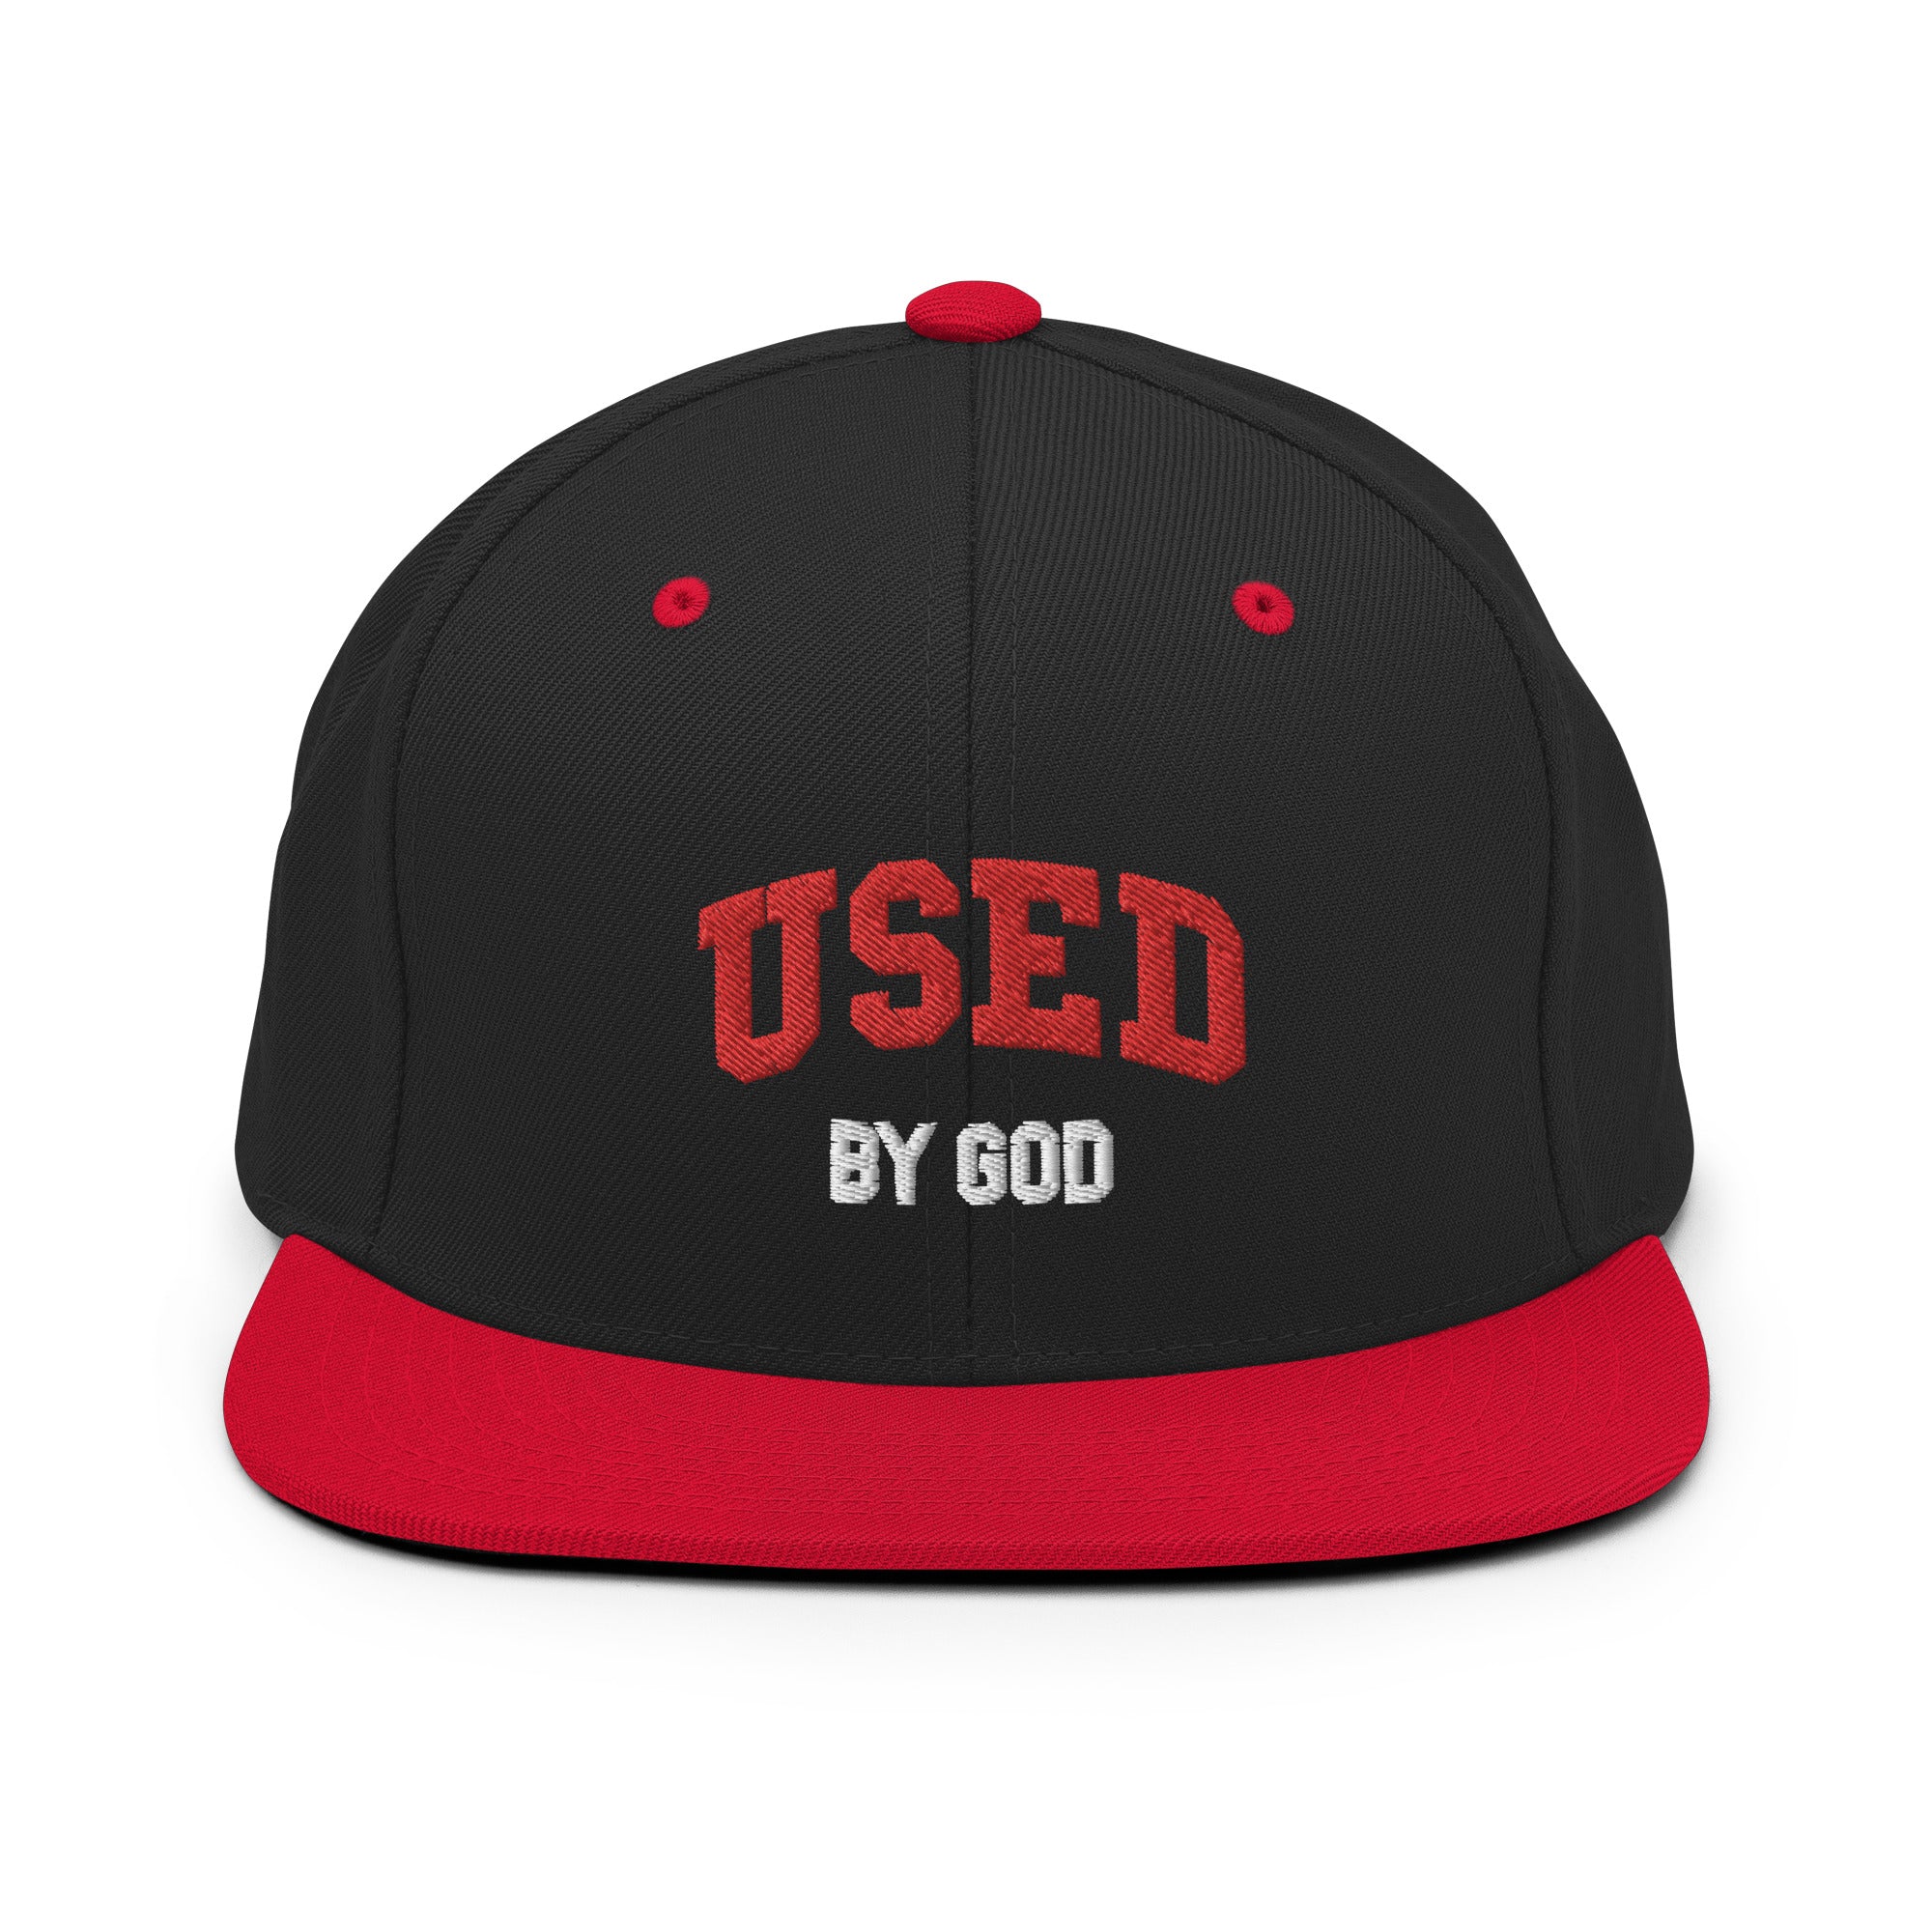 UBG Red Collegiate Snapback Hat, Used By God, Used By God Clothing, Christian Apparel, Christian Hats, Christian T-Shirts, Christian Clothing, God Shirts, Christian Sweatshirts, God Clothing, Jesus Hoodie, Jesus Clothes, God Is Dope, Art Of Homage, Red Letter Clothing, Elevated Faith, Active Faith Sports, Beacon Threads, God The Father Apparel